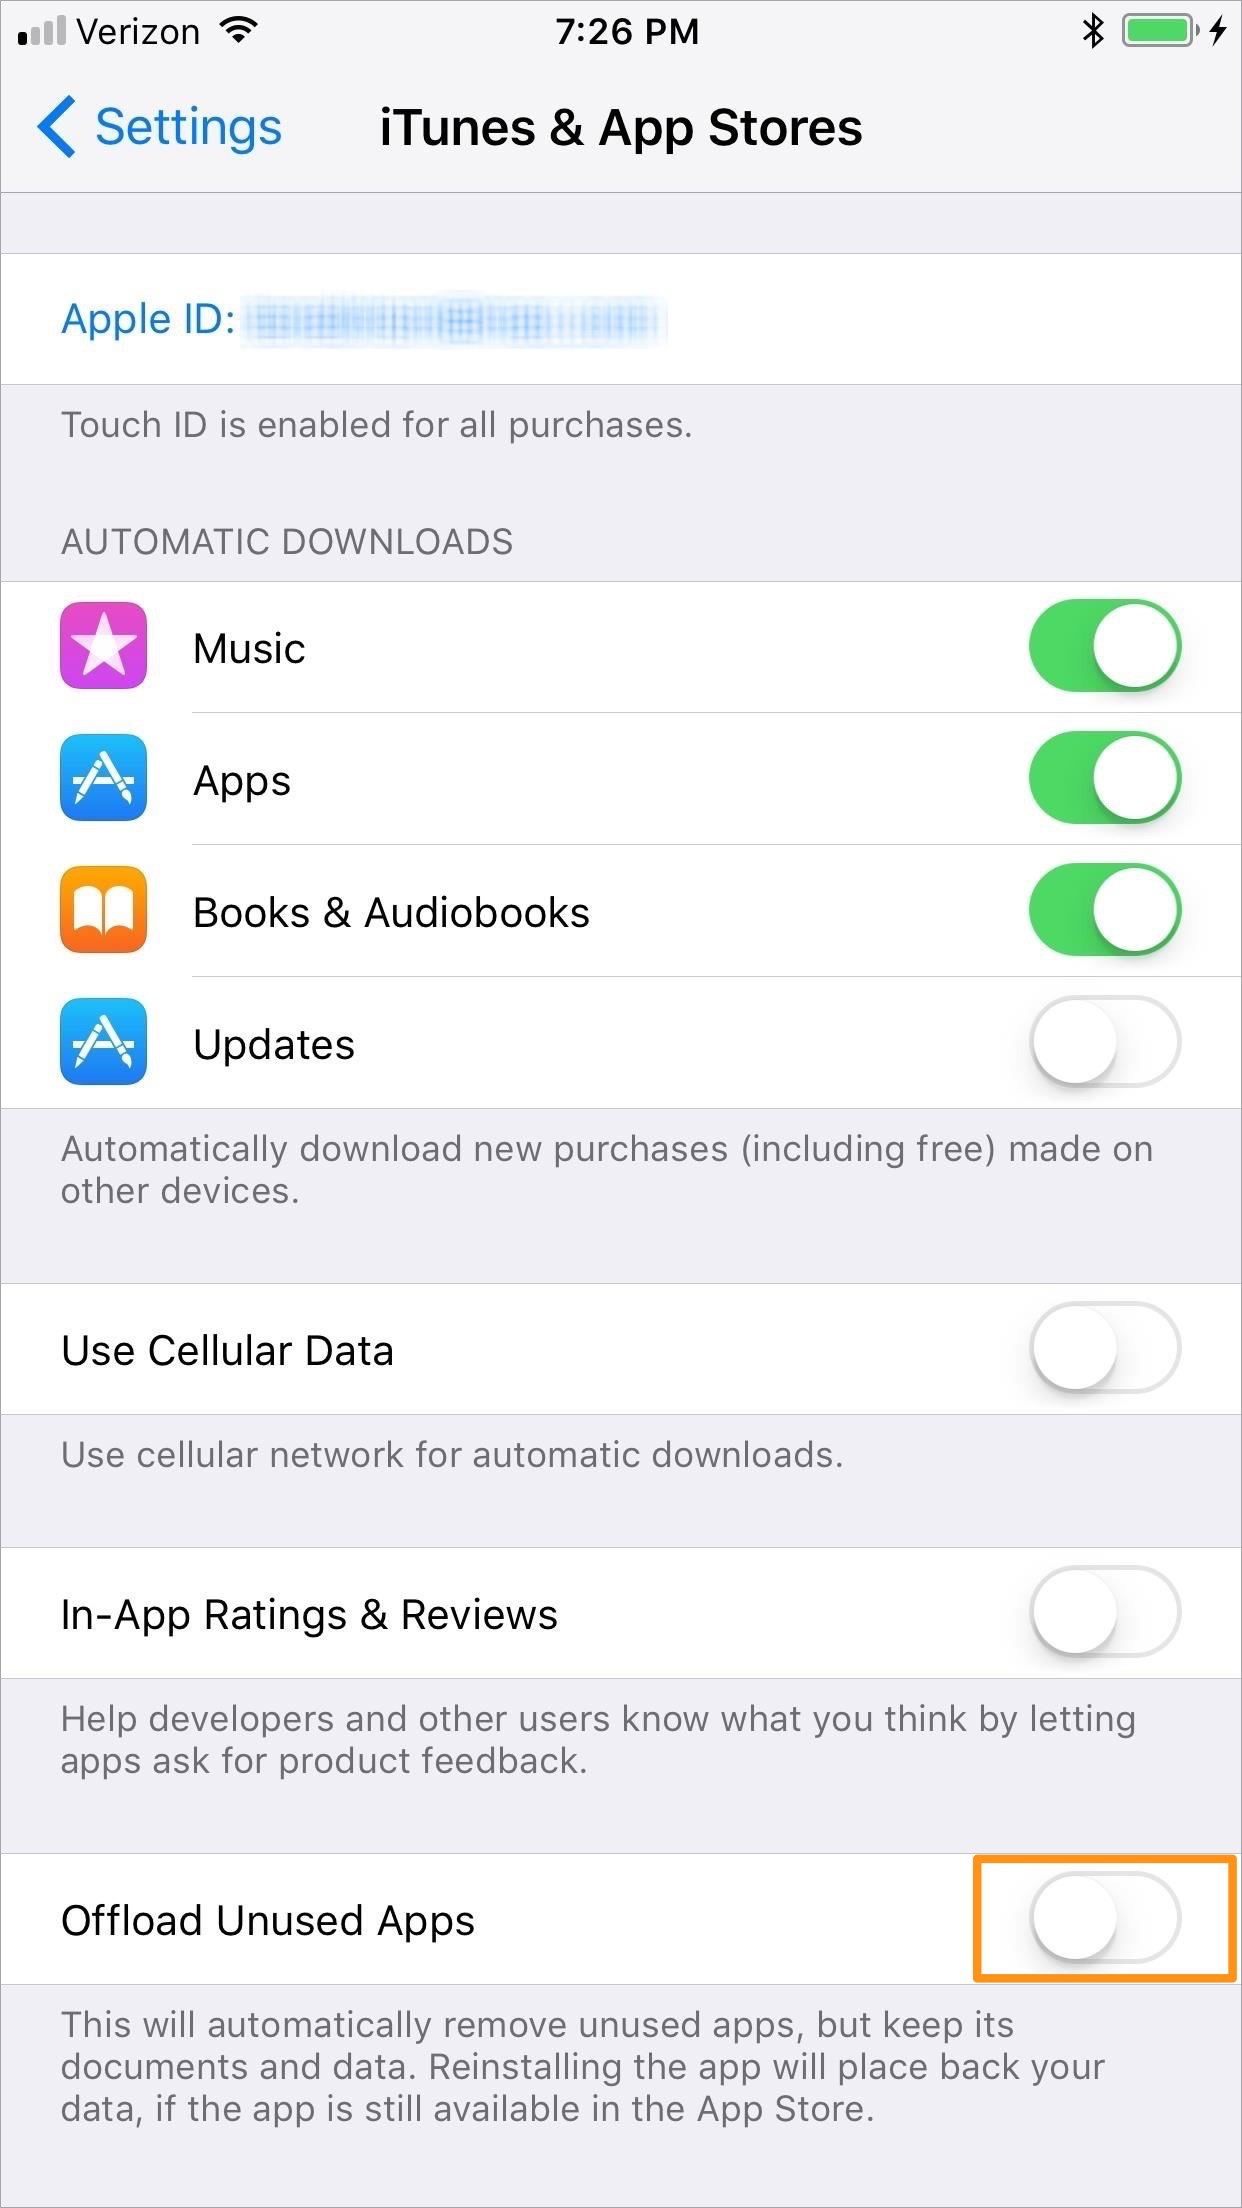 How to Offload Apps from iPhone in iOS 11